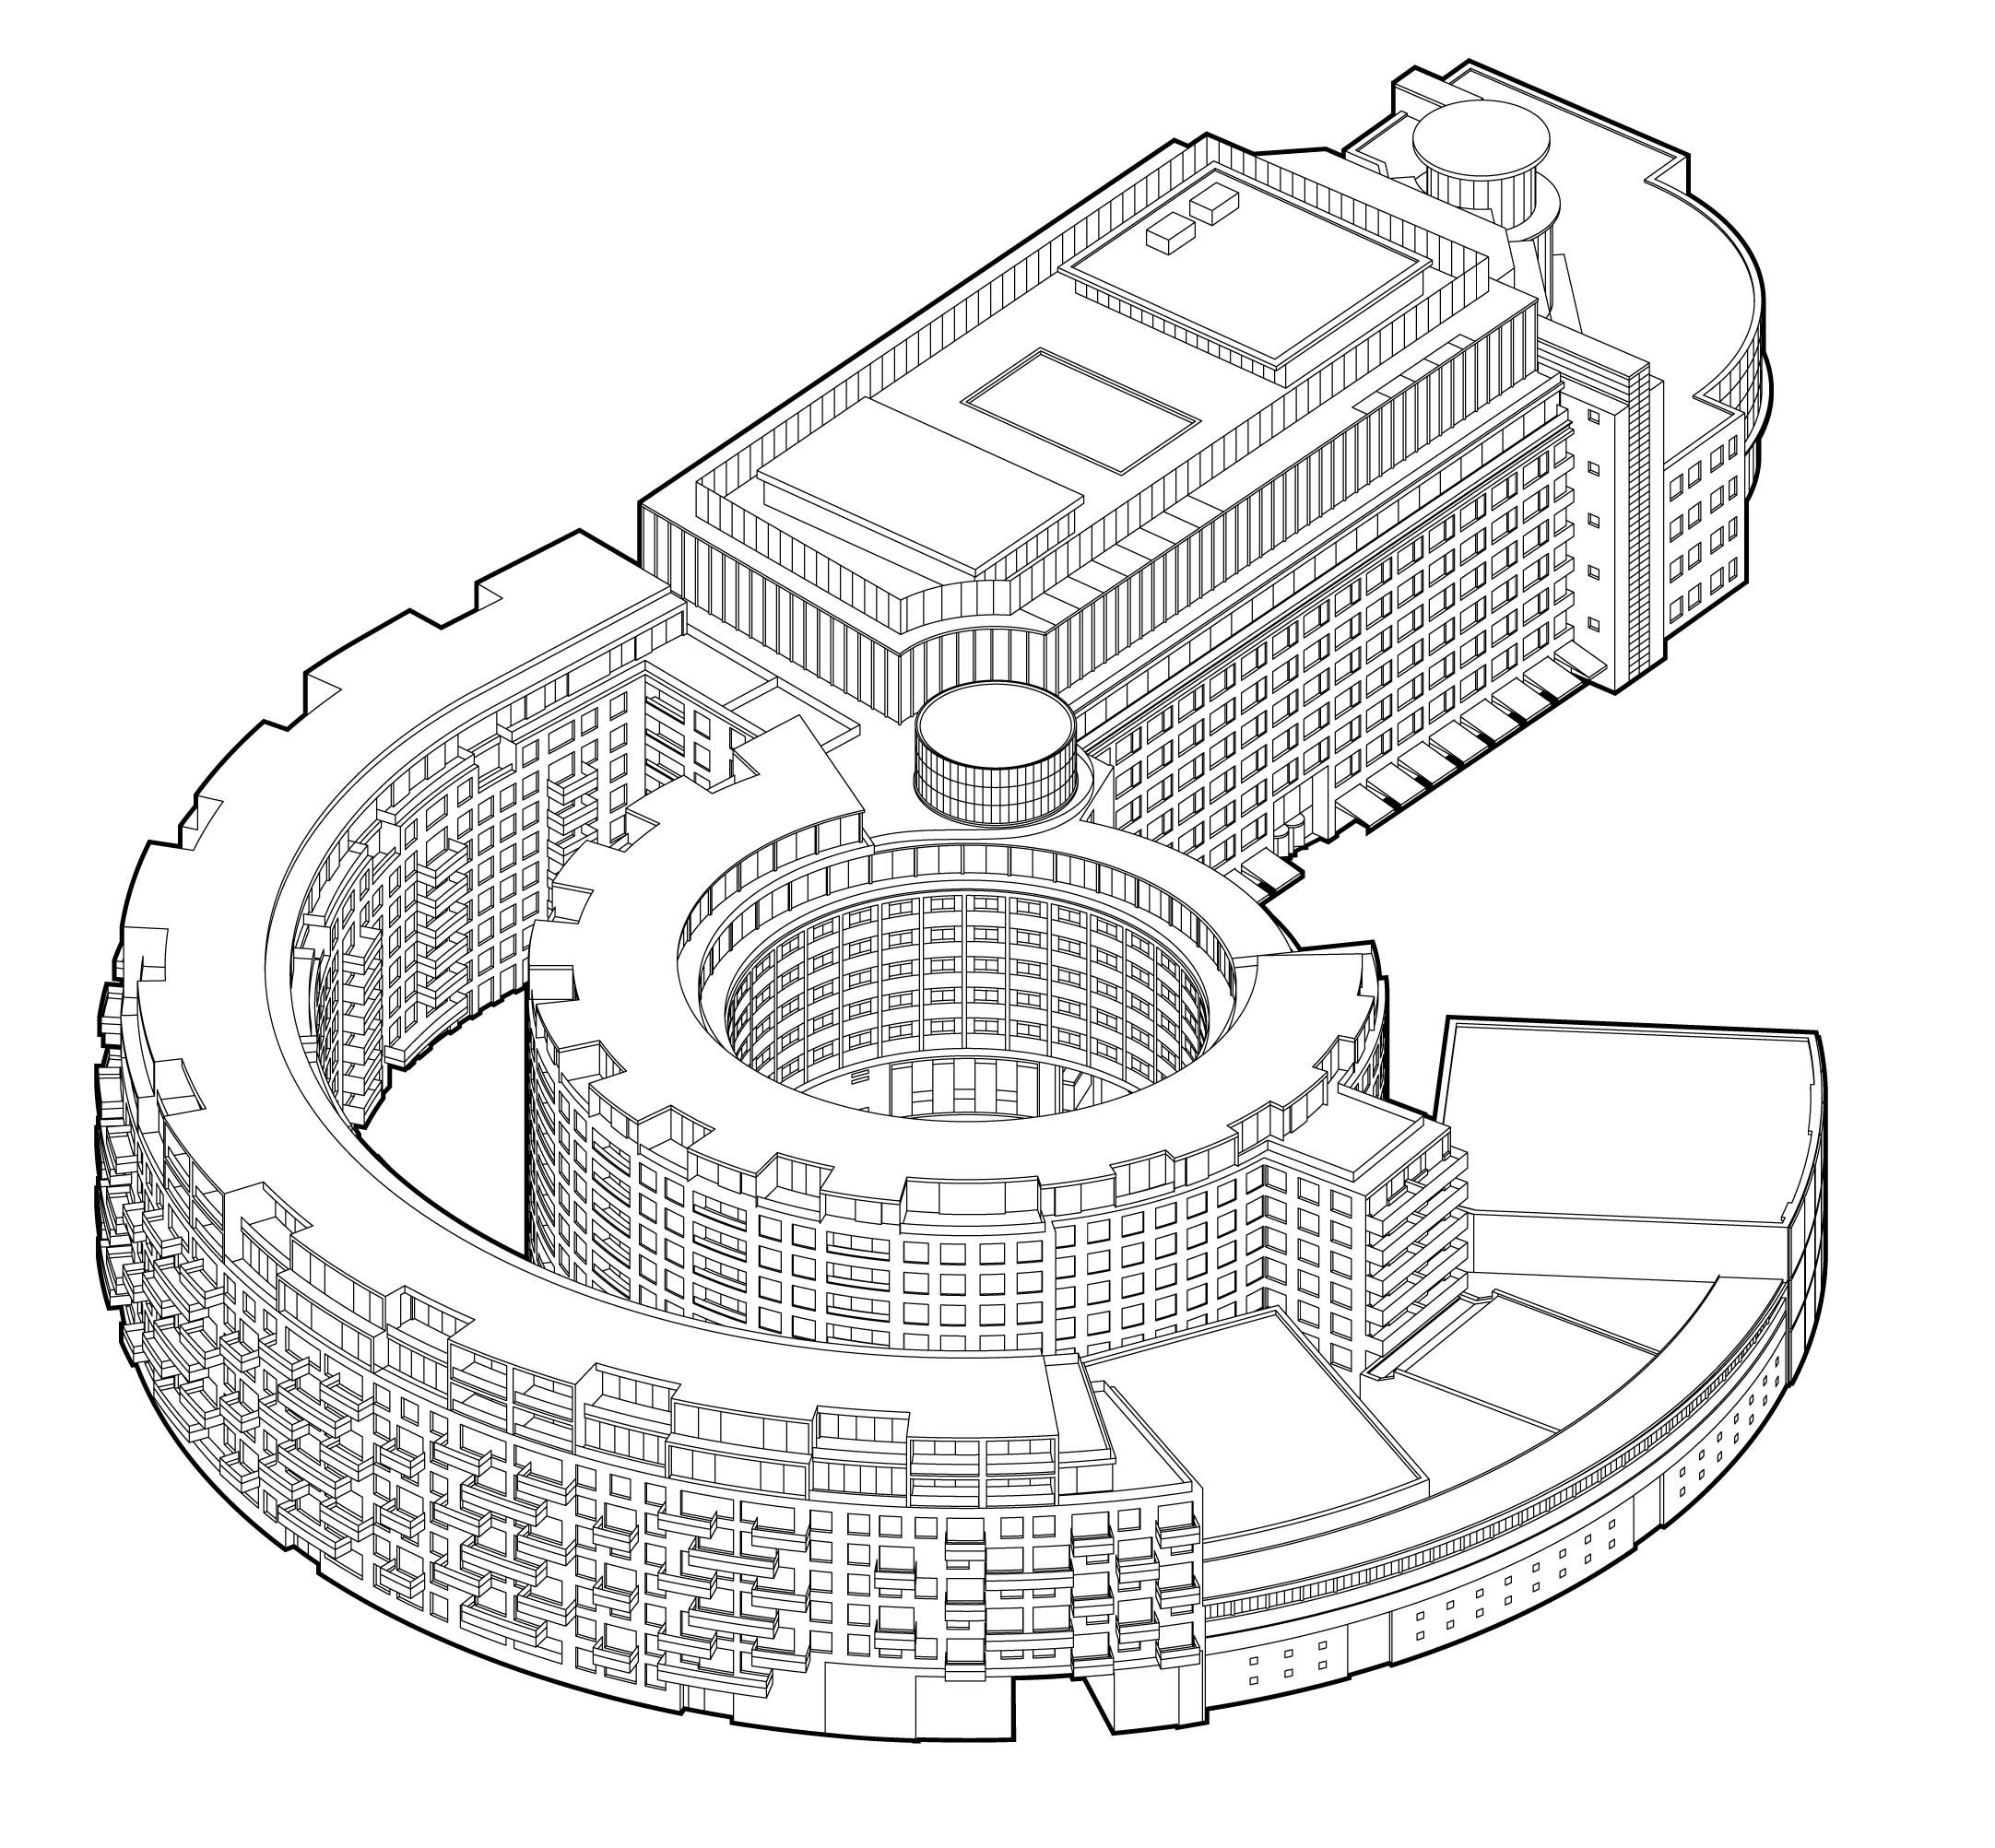 Diagram of the Television Centre